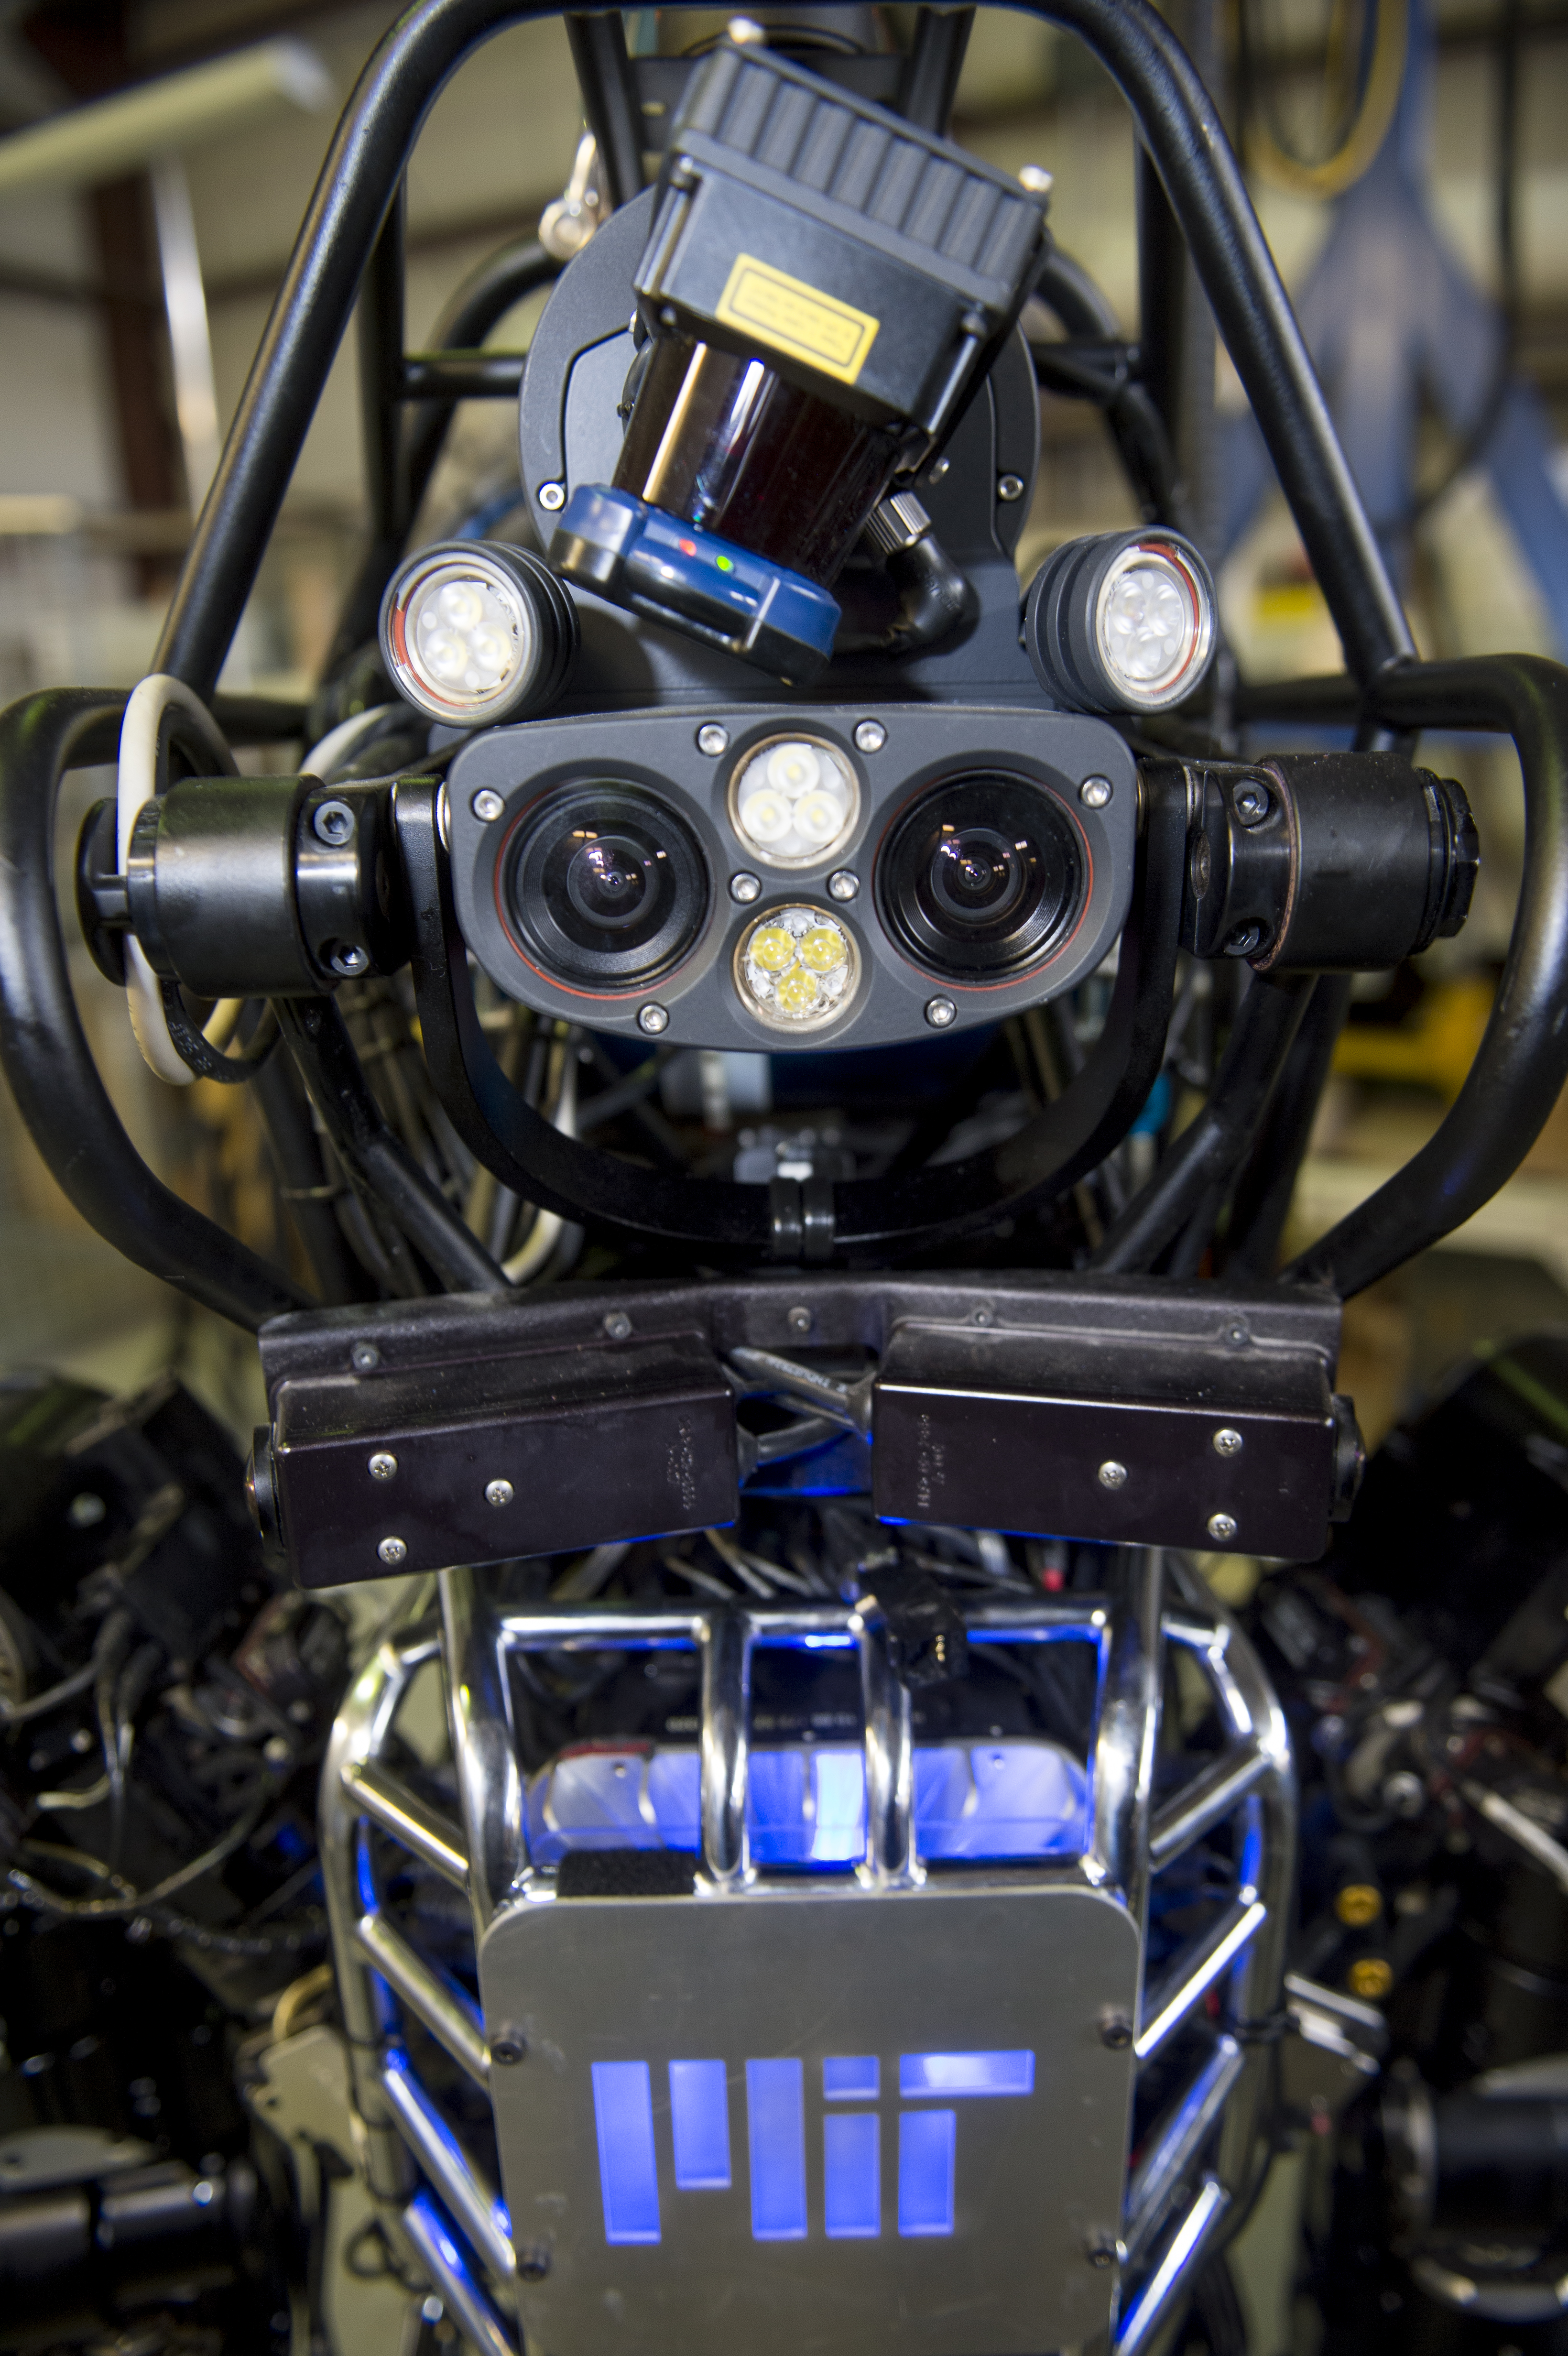 The capabilities of the Atlas robot are demonstrated during the Massachusetts Institute of Technology's Computer Science and Artificial Intelligence Laboratory's Demo Day on April 6, 2013 in Boston, Massachusetts. The Boston Dynamics funded Atlas robot is a part of the DARPA Robotics Challenge program. (Christian Science Monitor&mdash;Christian Science Monitor/Getty)